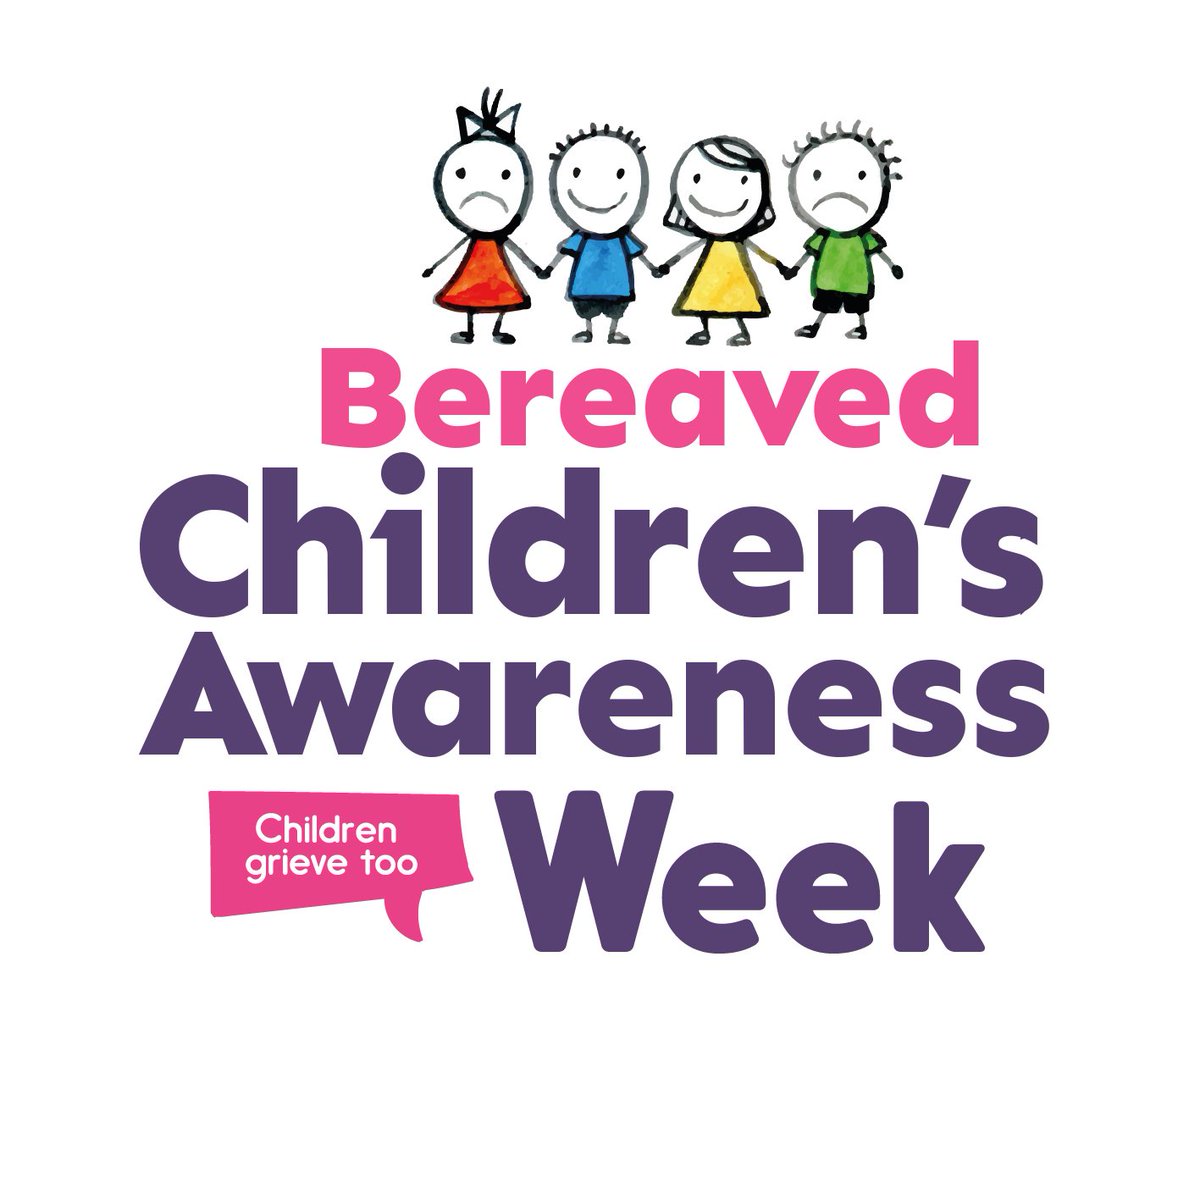 @Beaumont_Dublin are marking Bereaved Children's Awareness Week today. @CelineDeane, @gcrufli & co are hosting a Public Information stand on #childrengrievetoo There will also be a Remembrance Tree there today too, so do drop by. @IrishHospice @tusla @socworkbeaumont